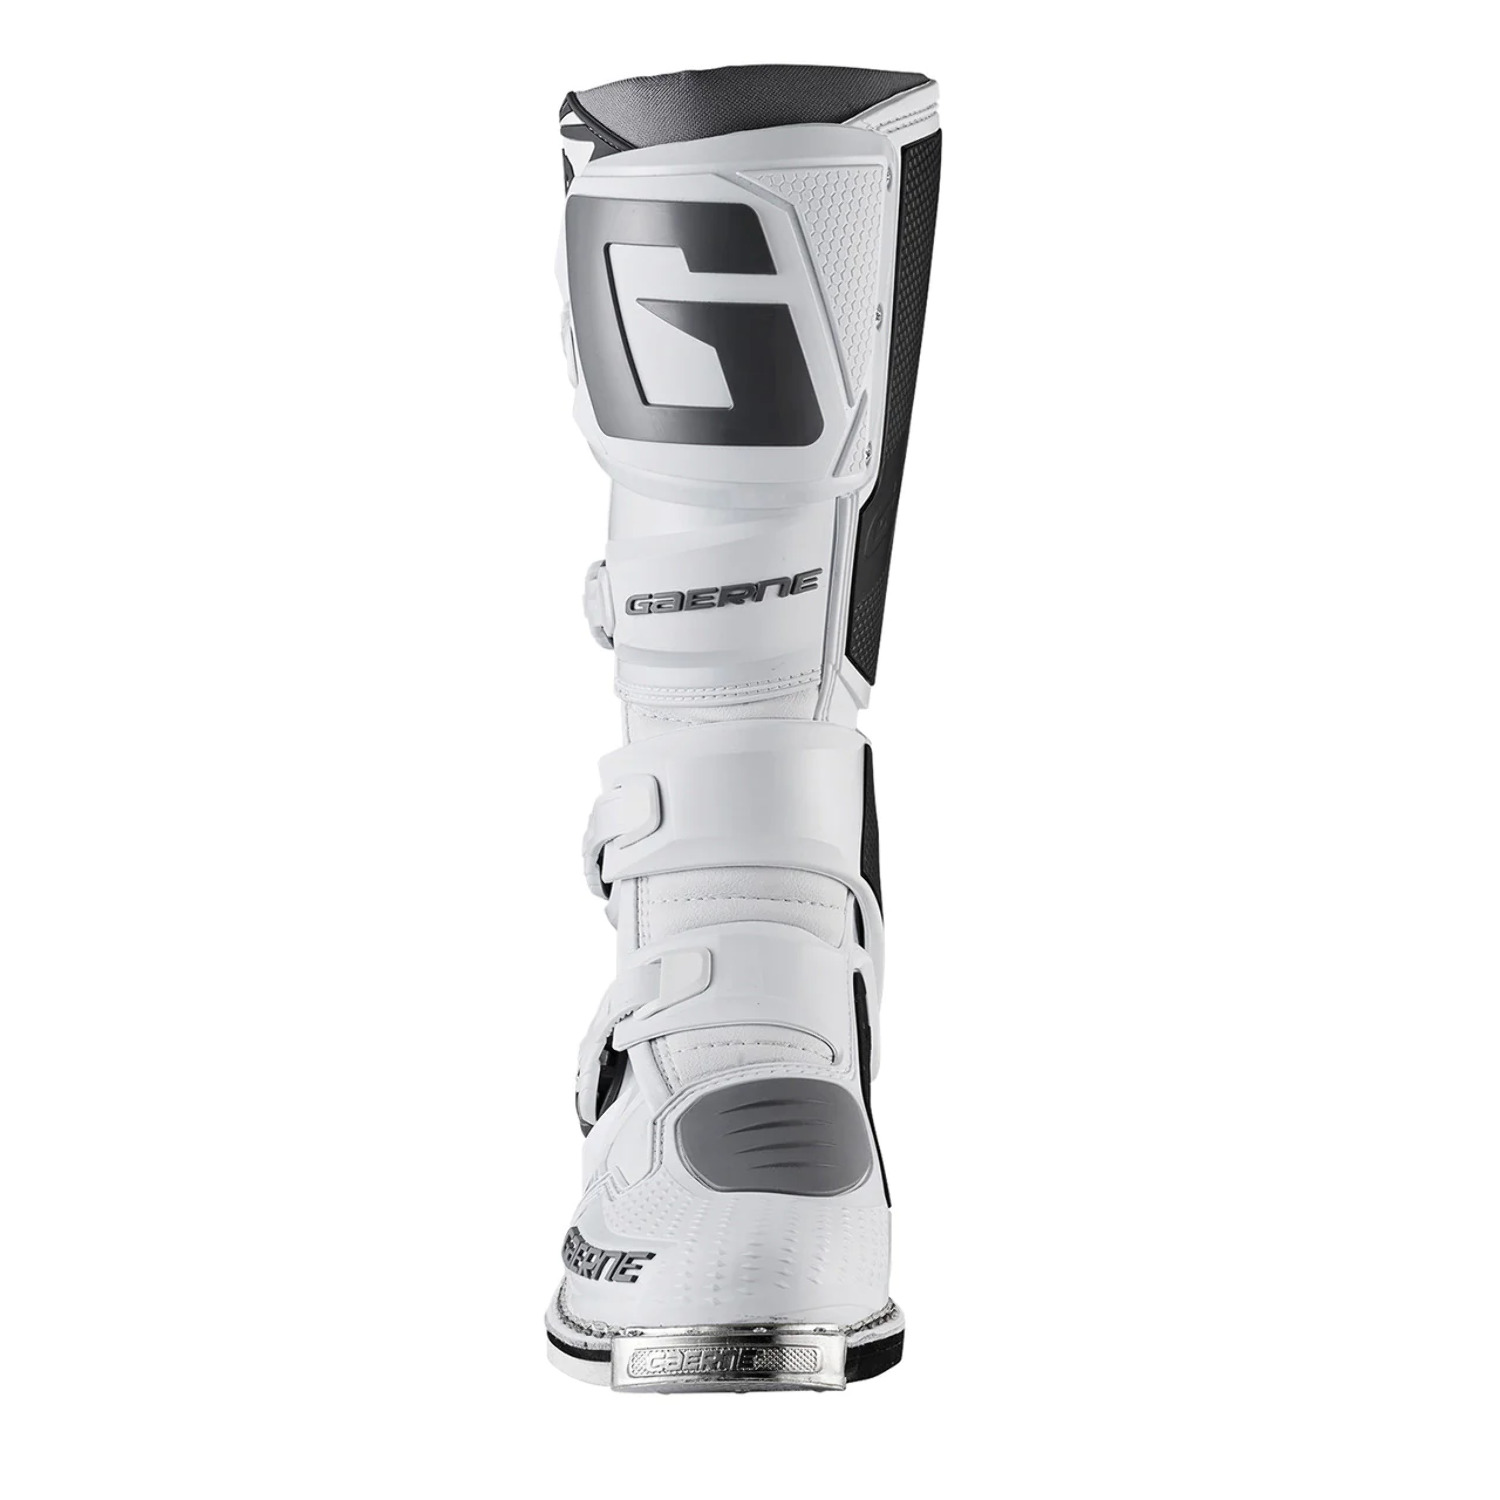 Gaerne SG12 Mens MX Offroad Boots White/Silver 13 USA - image 3 of 9